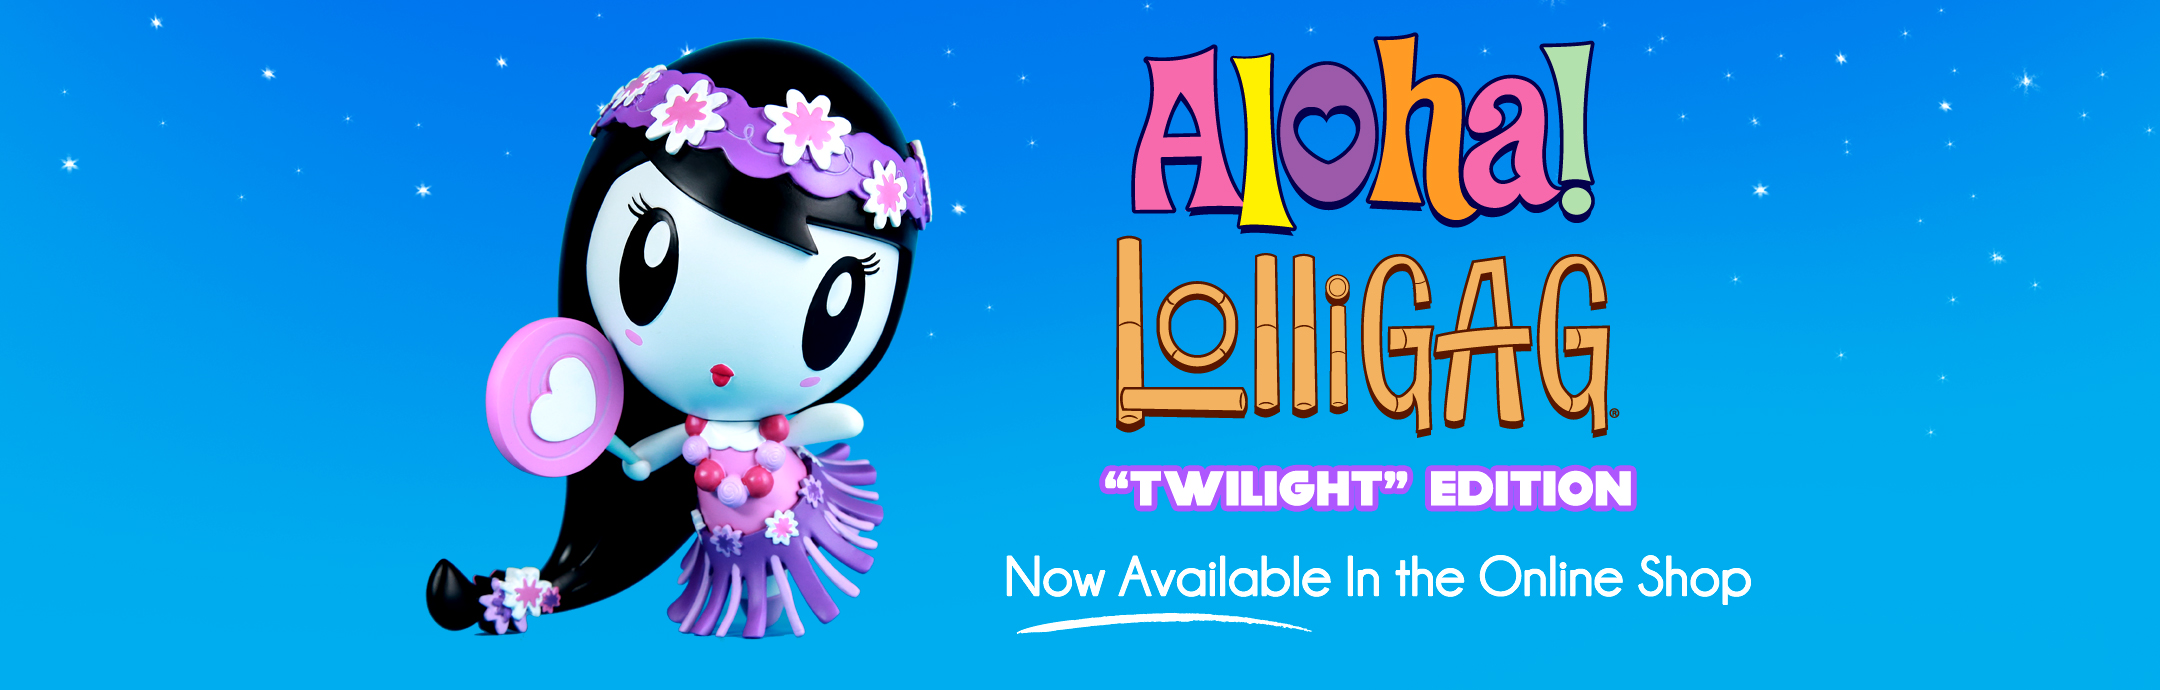 Lolligag Hula Twilight Edition now available in the online store